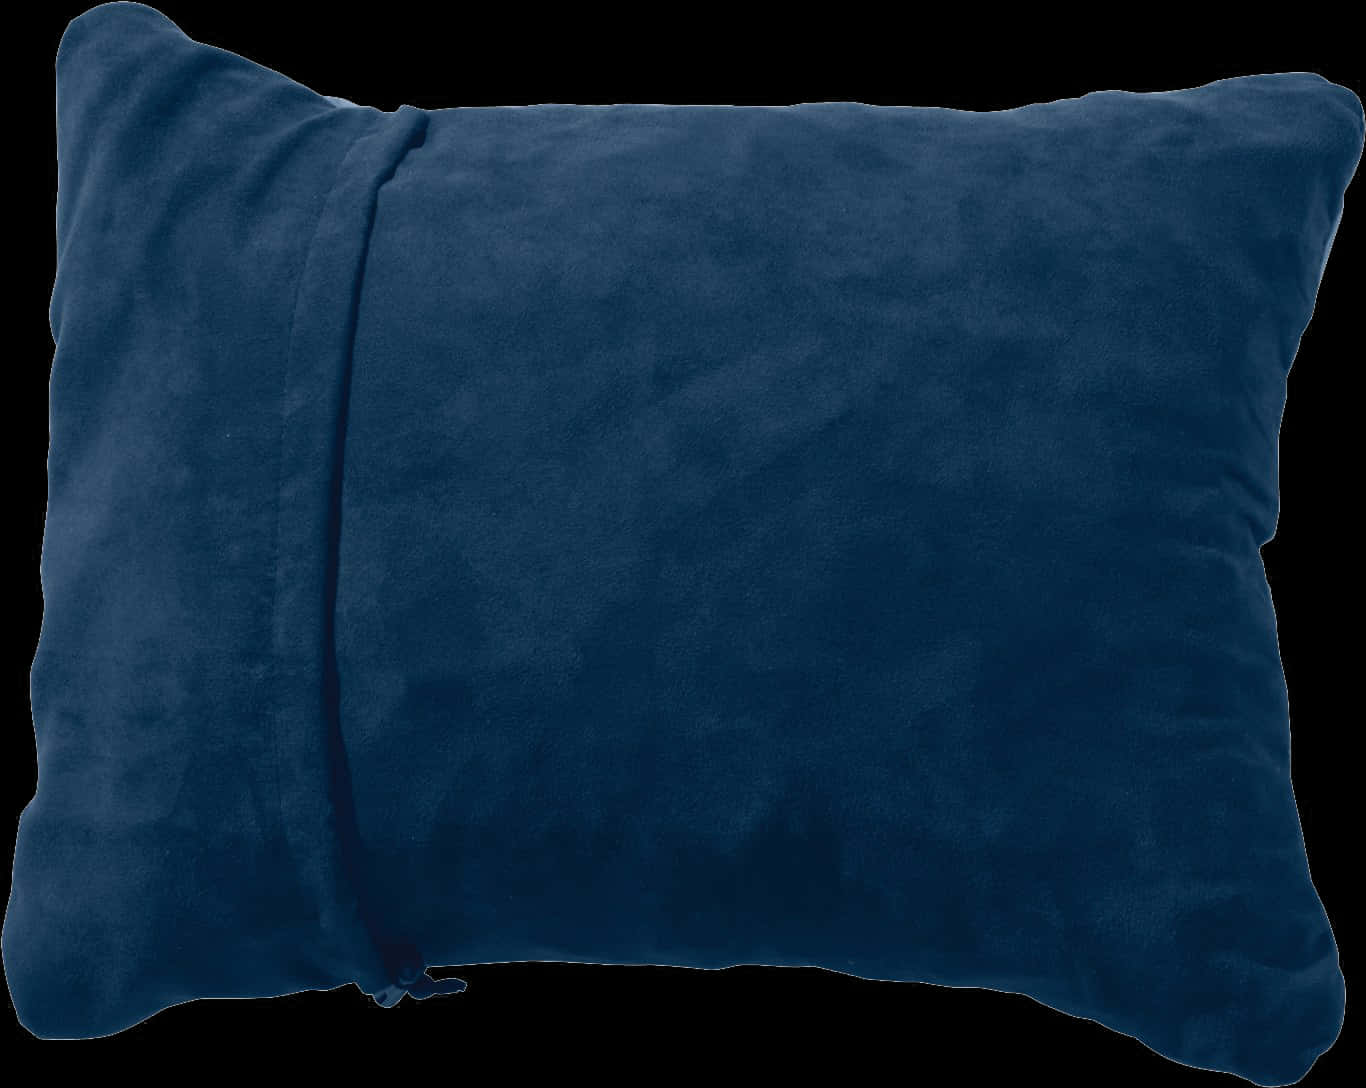 A Blue Pillow With A Black Background